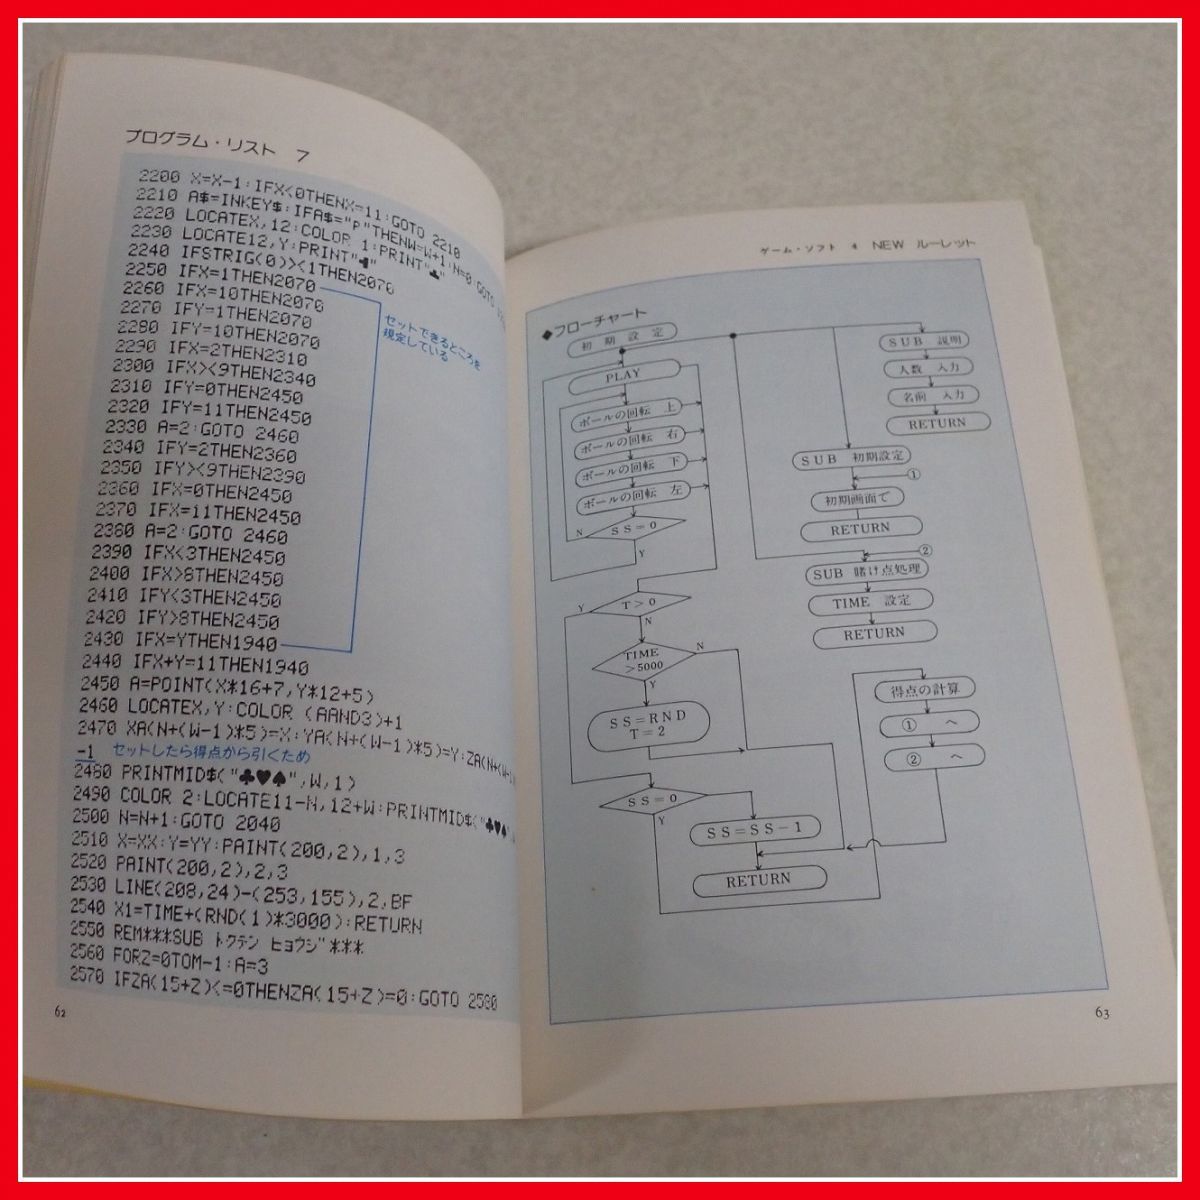 * publication PC-6001 game * library KSS microcomputer Pro new star publish company computer / programming relation [PP